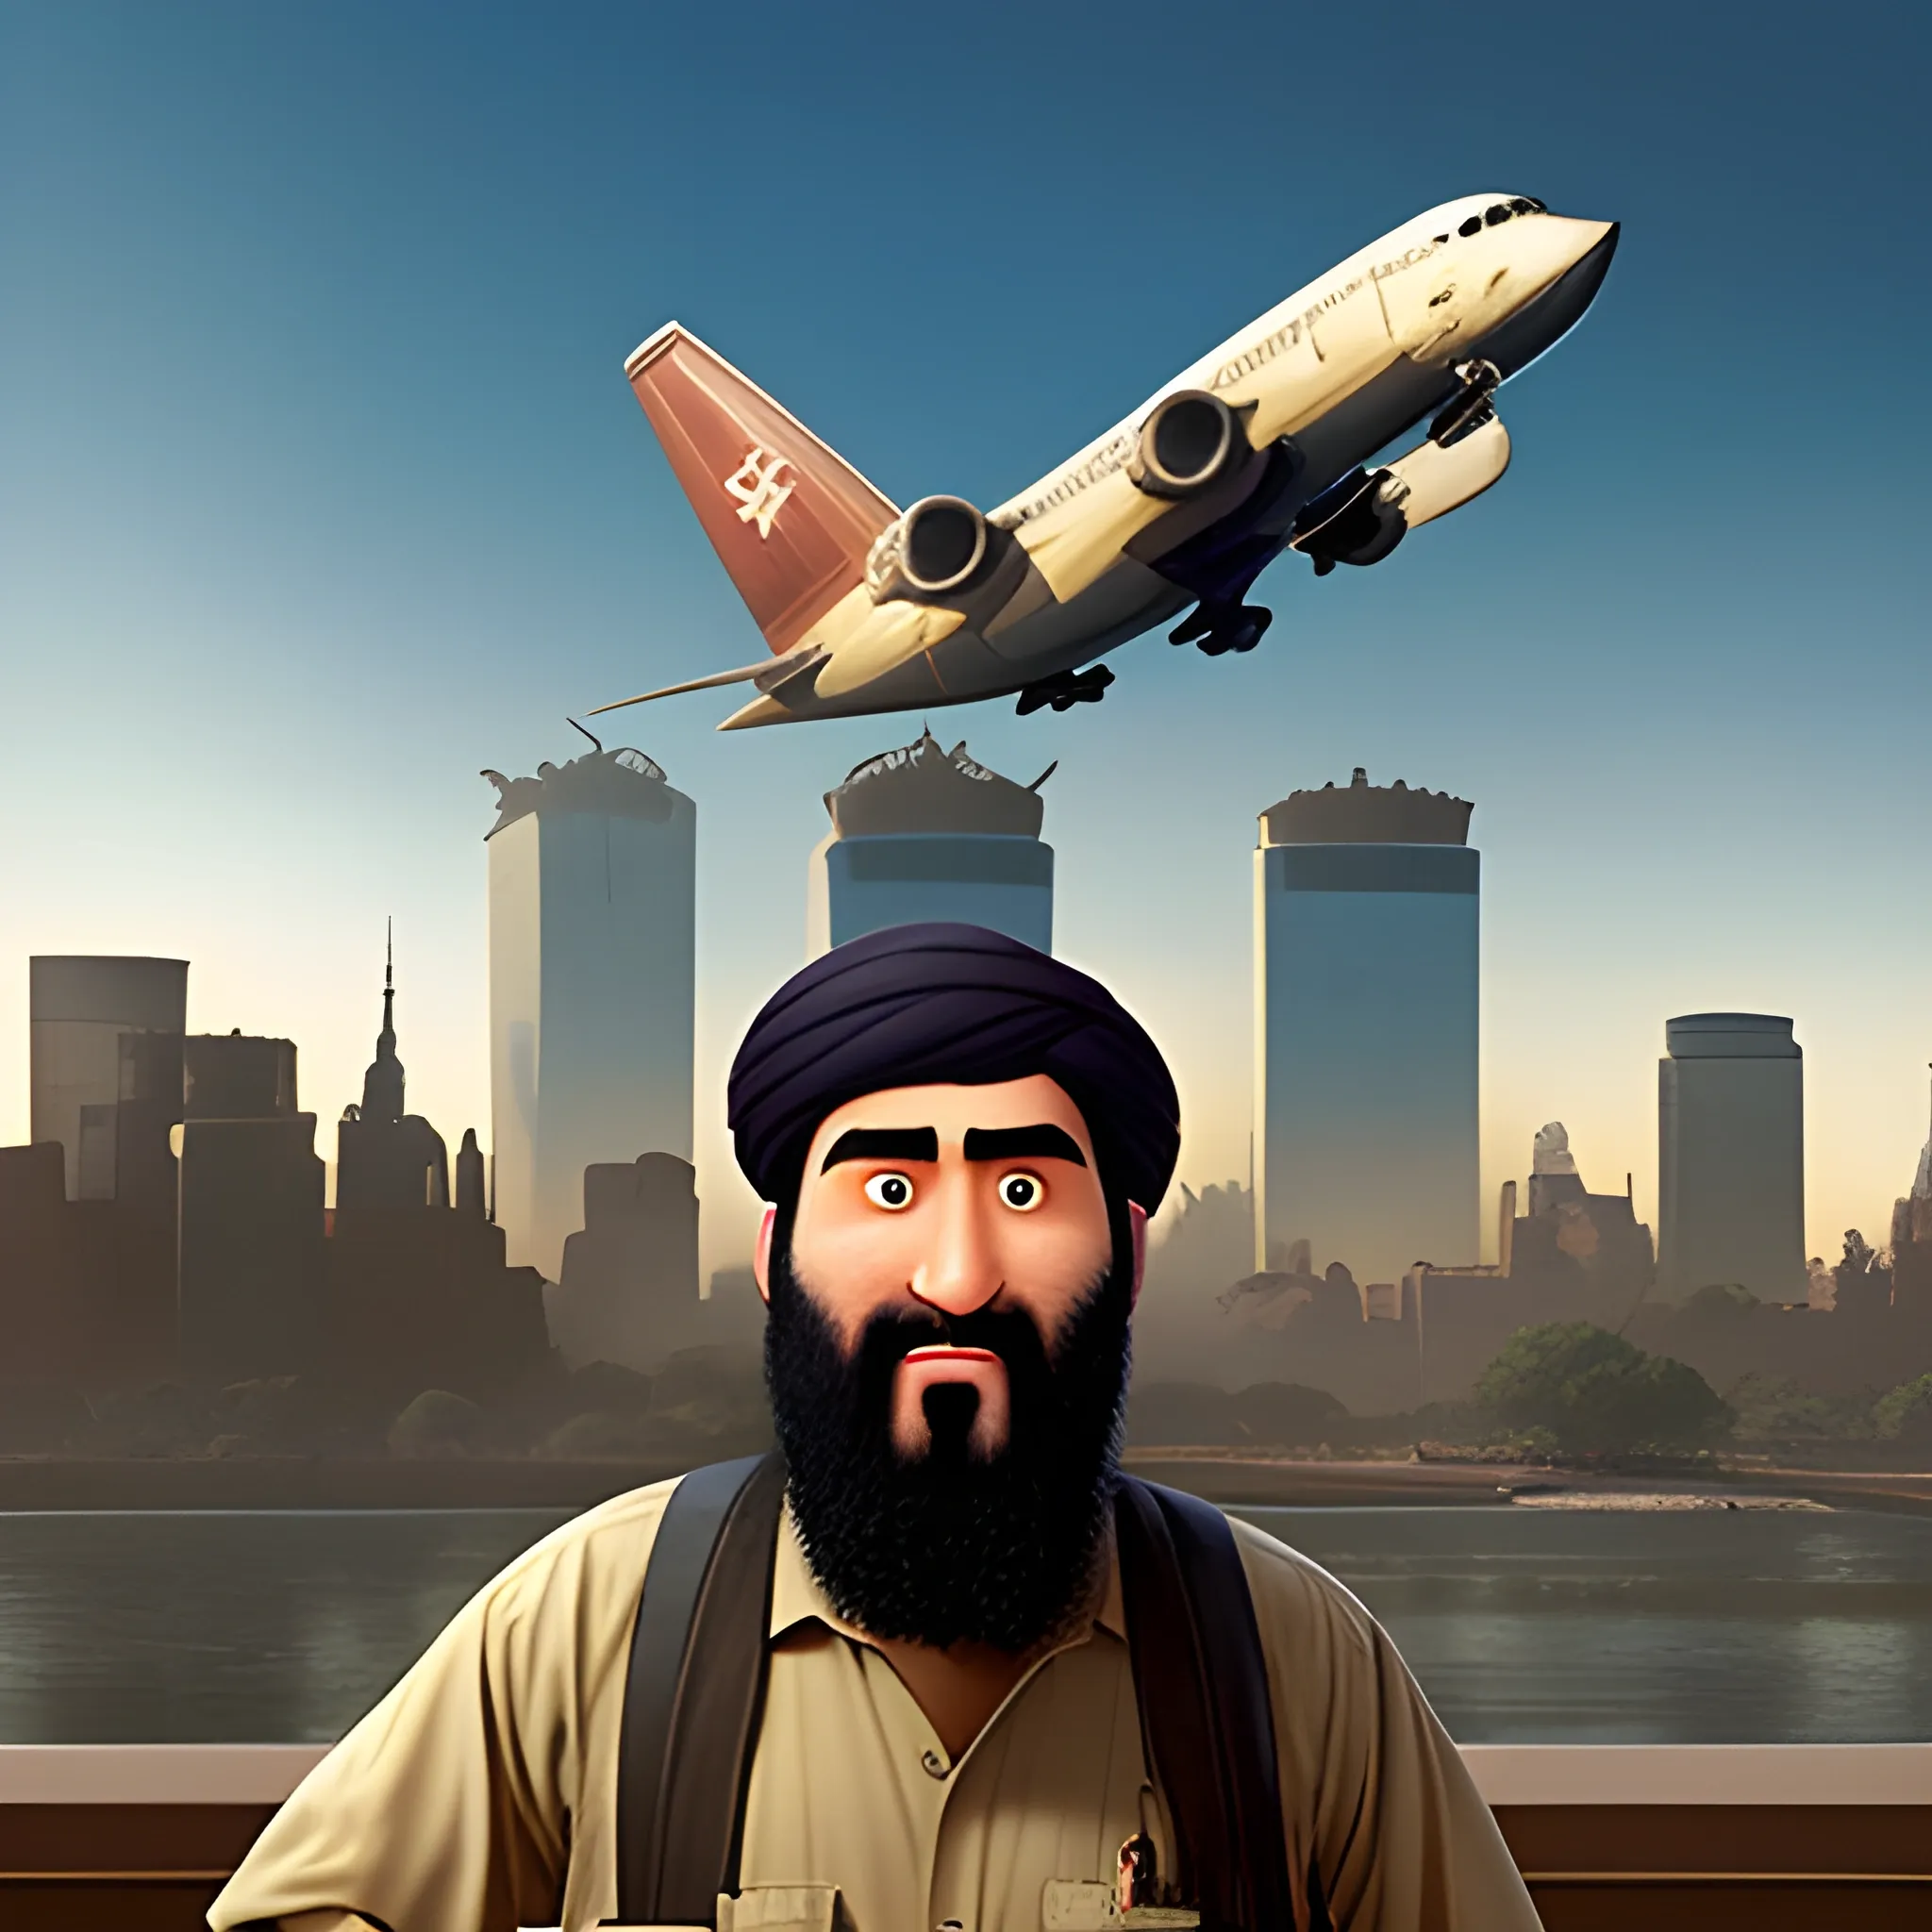 A pixar movie about Osama Bin Laden in front of the twin towers while a plane is stuck in the south tower